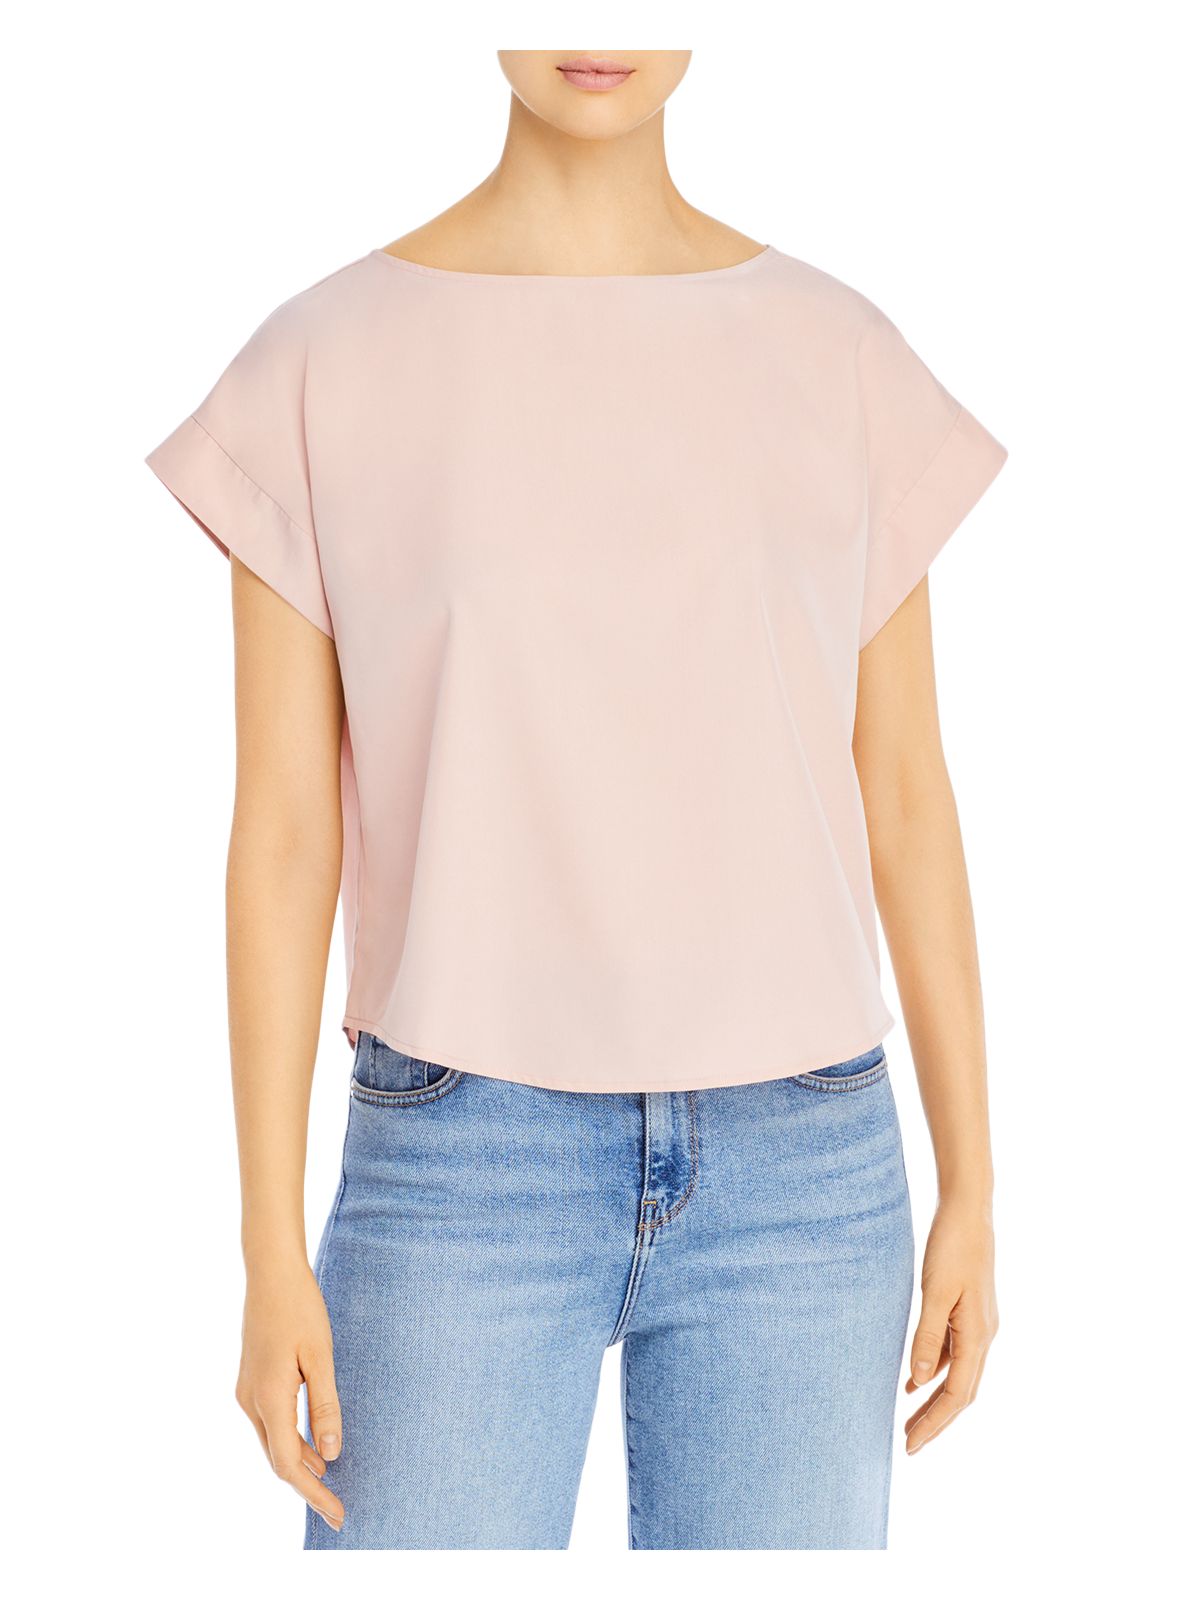 EILEEN FISHER Womens Pink Stretch Cap Sleeve Boat Neck Top M